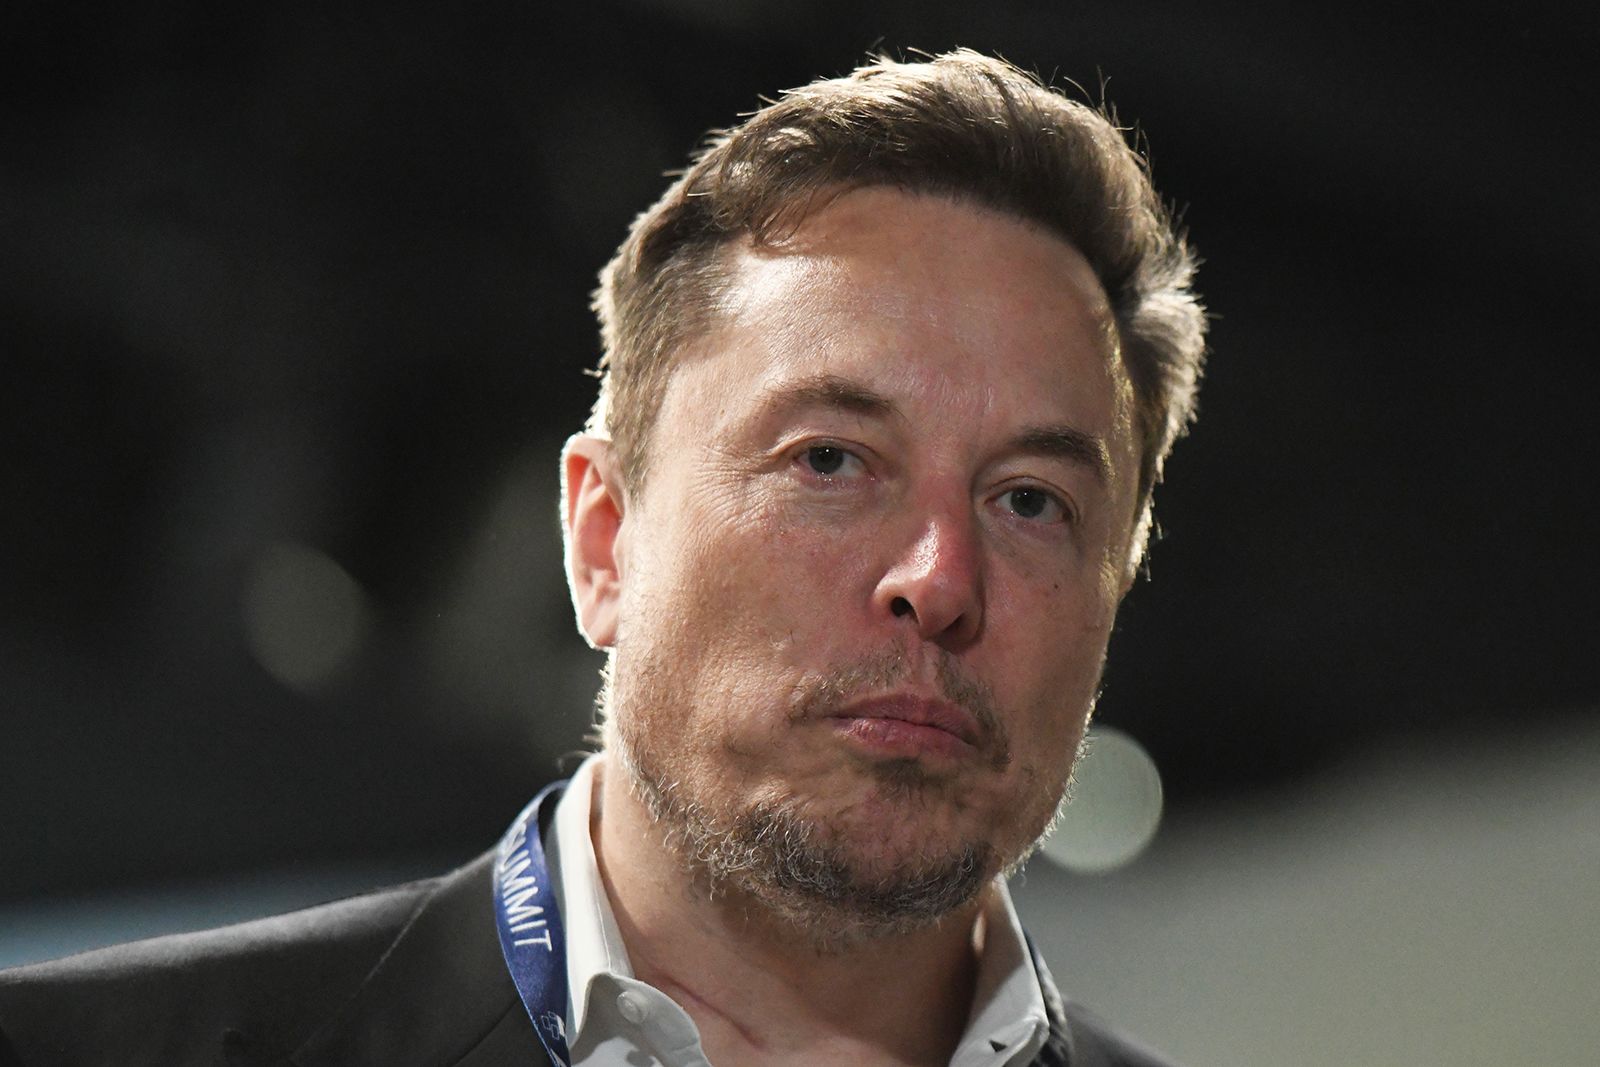 Elon Musk claims X has less antisemitic content than peers